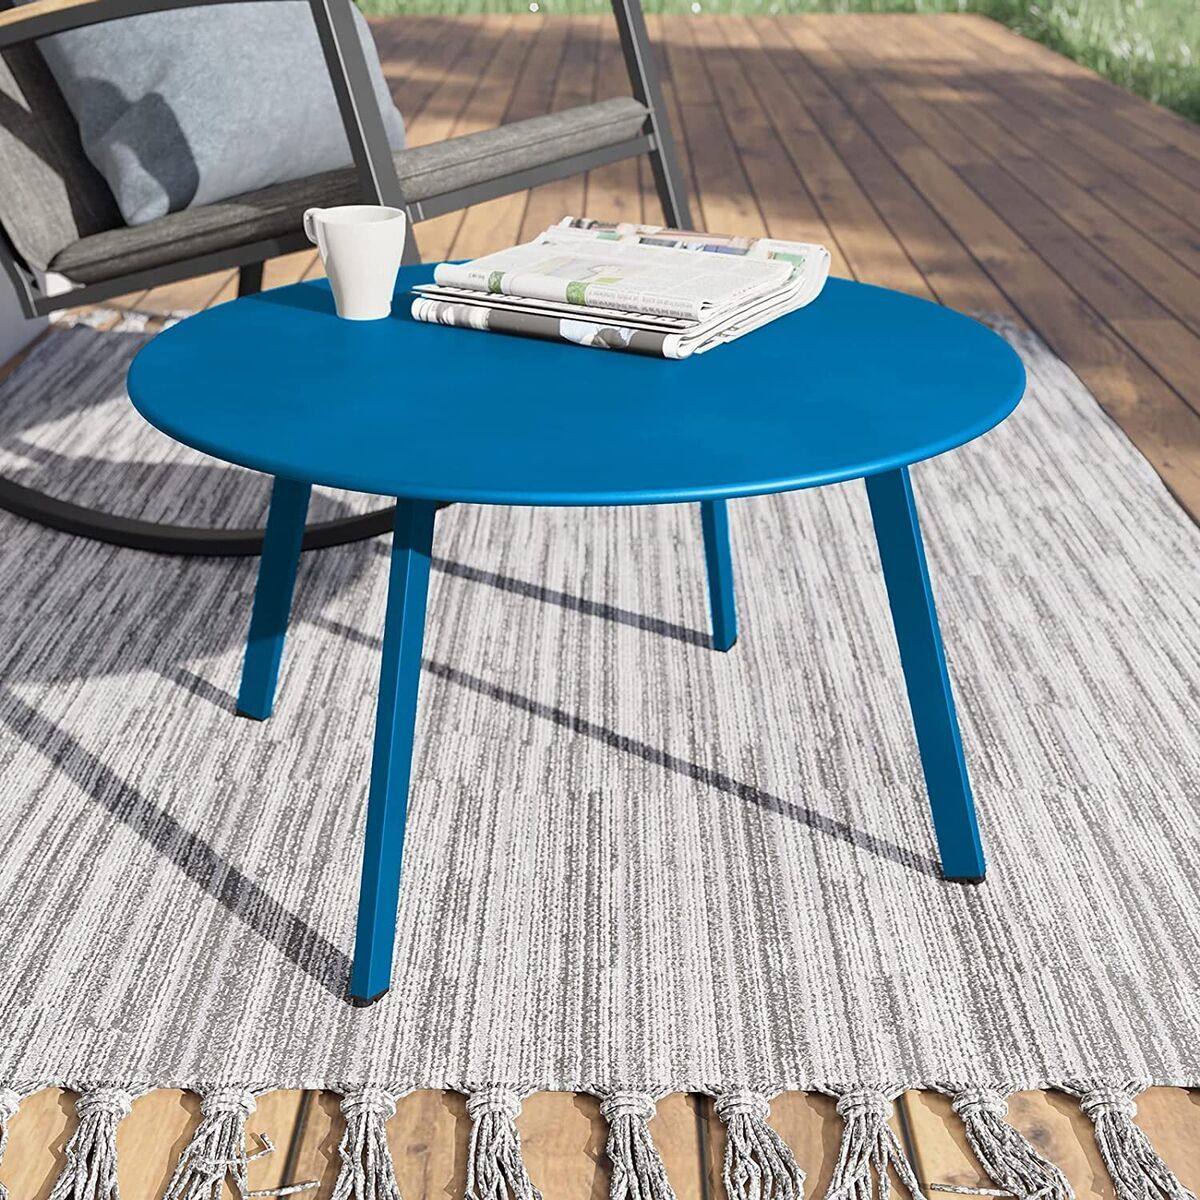 Outdoor Steel Patio Side Table, Round Coffee Table Weather Resistant ,blue  | Ebay Pertaining To Round Steel Patio Coffee Tables (View 15 of 15)